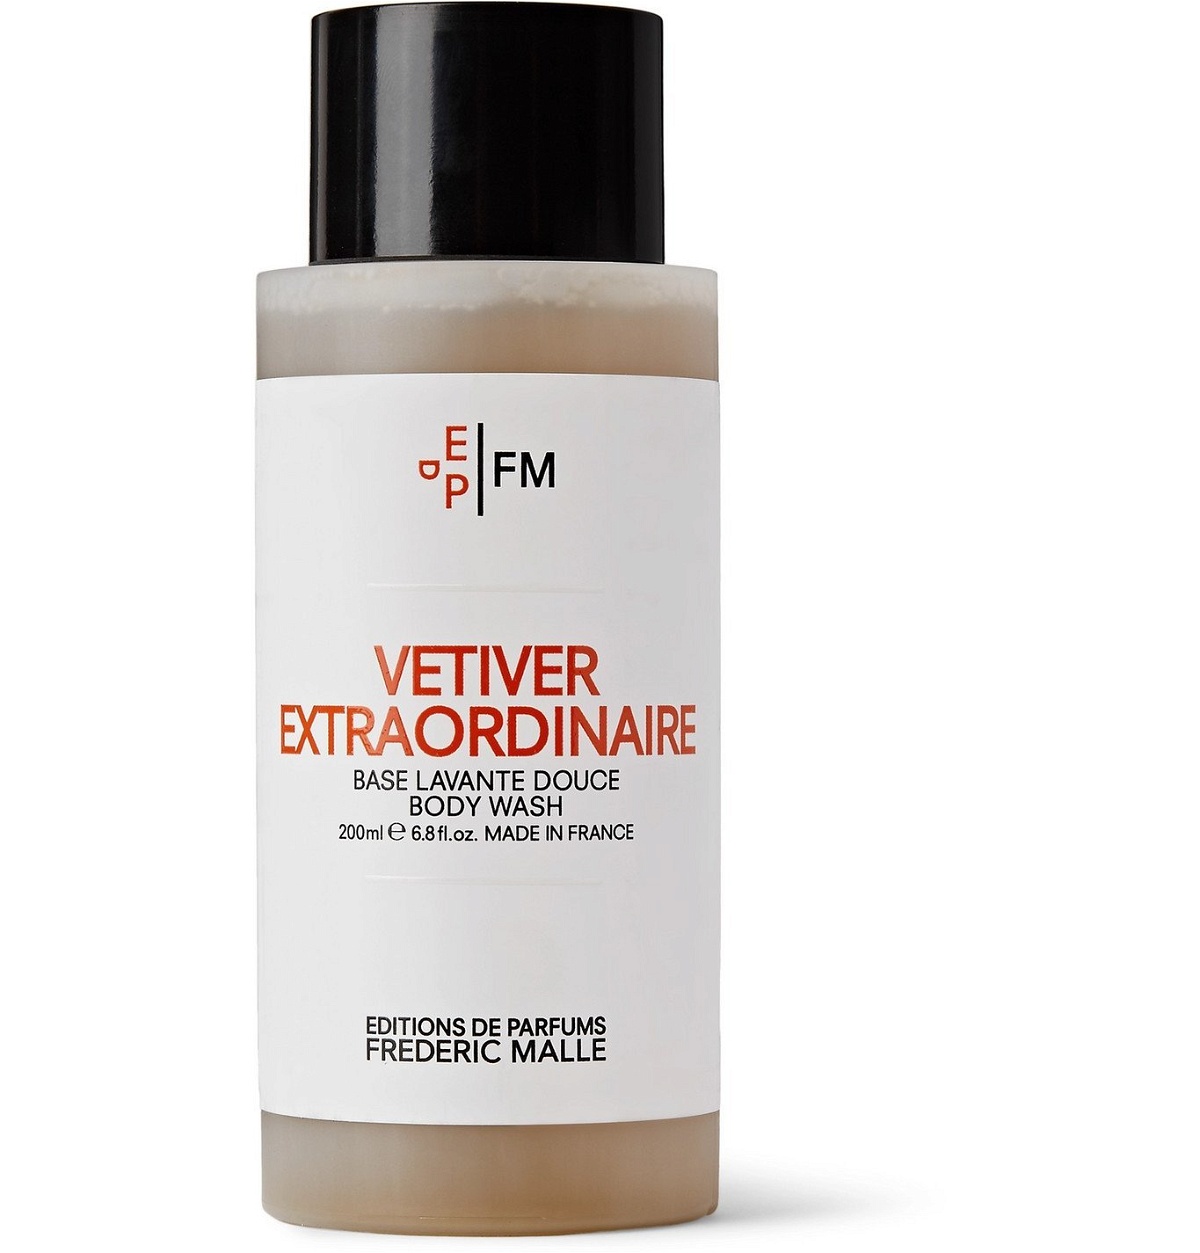 Photo: Frederic Malle - Vetiver Extraordinaire Body Wash, 200ml - Colorless